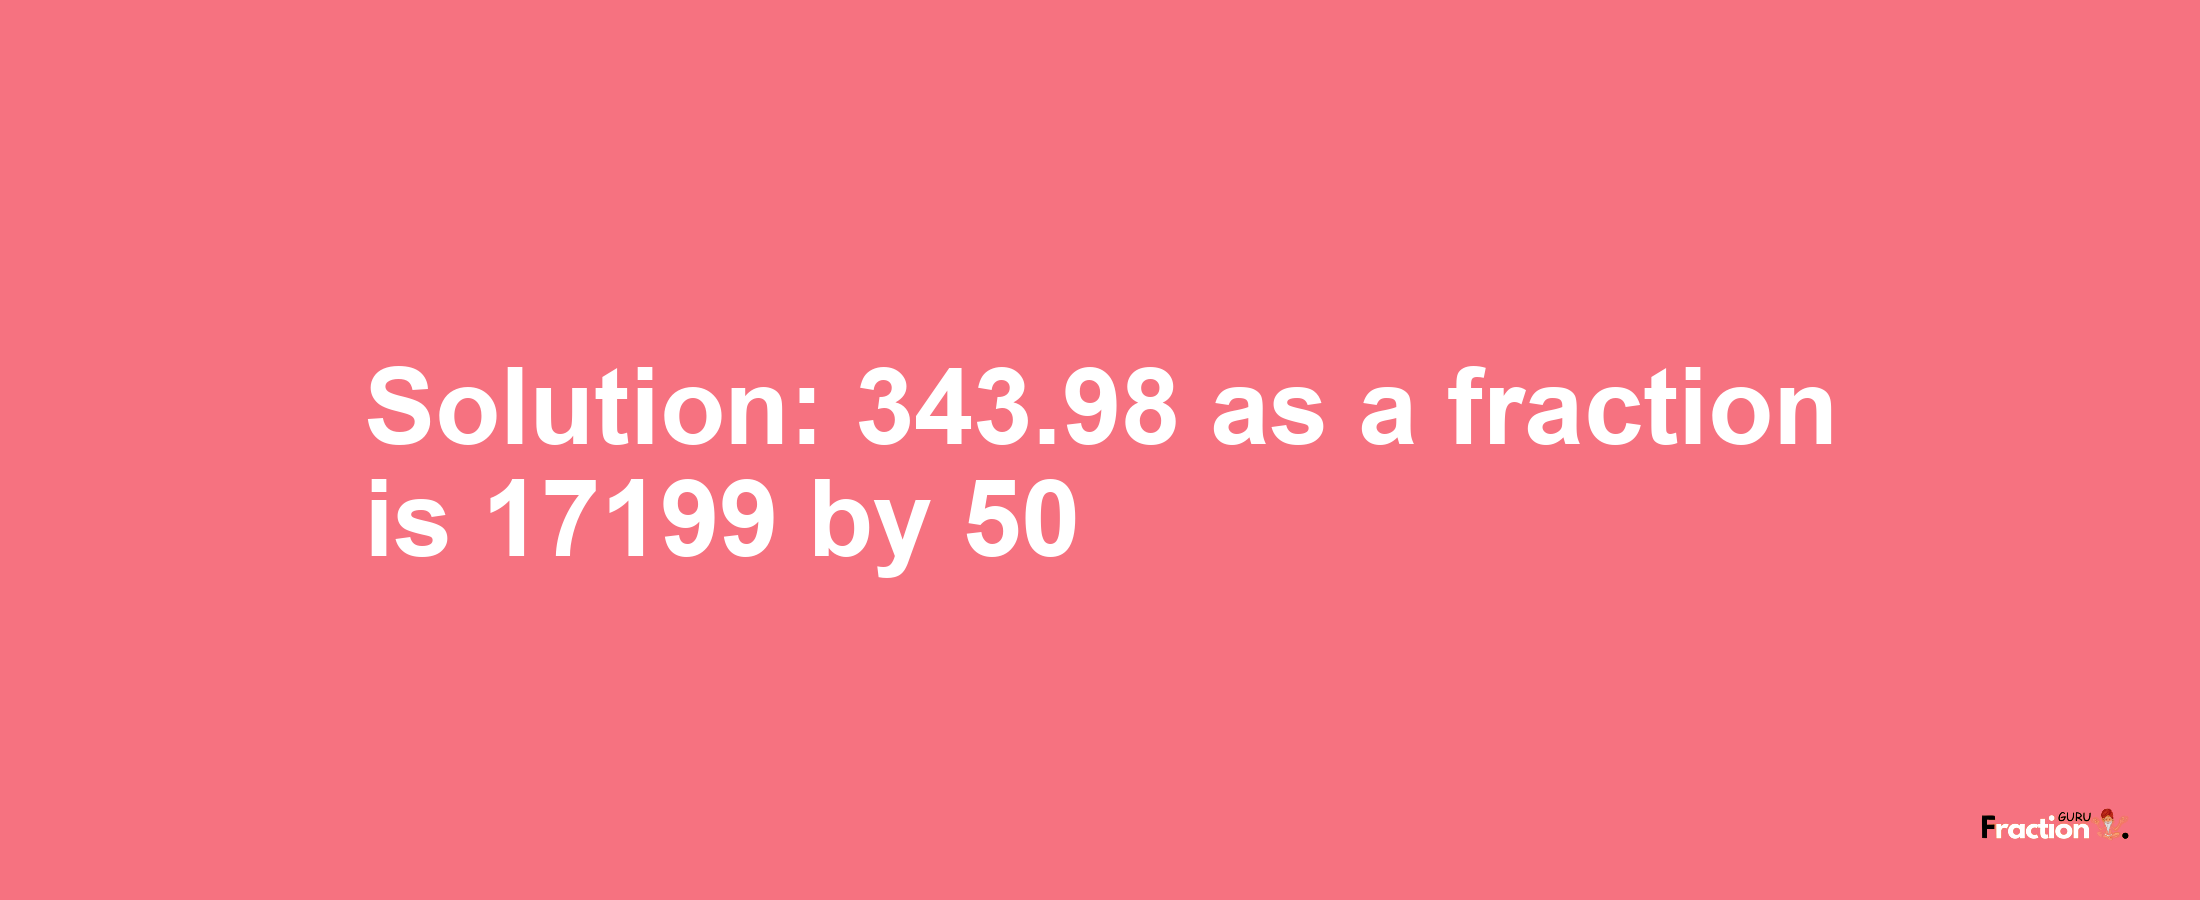 Solution:343.98 as a fraction is 17199/50